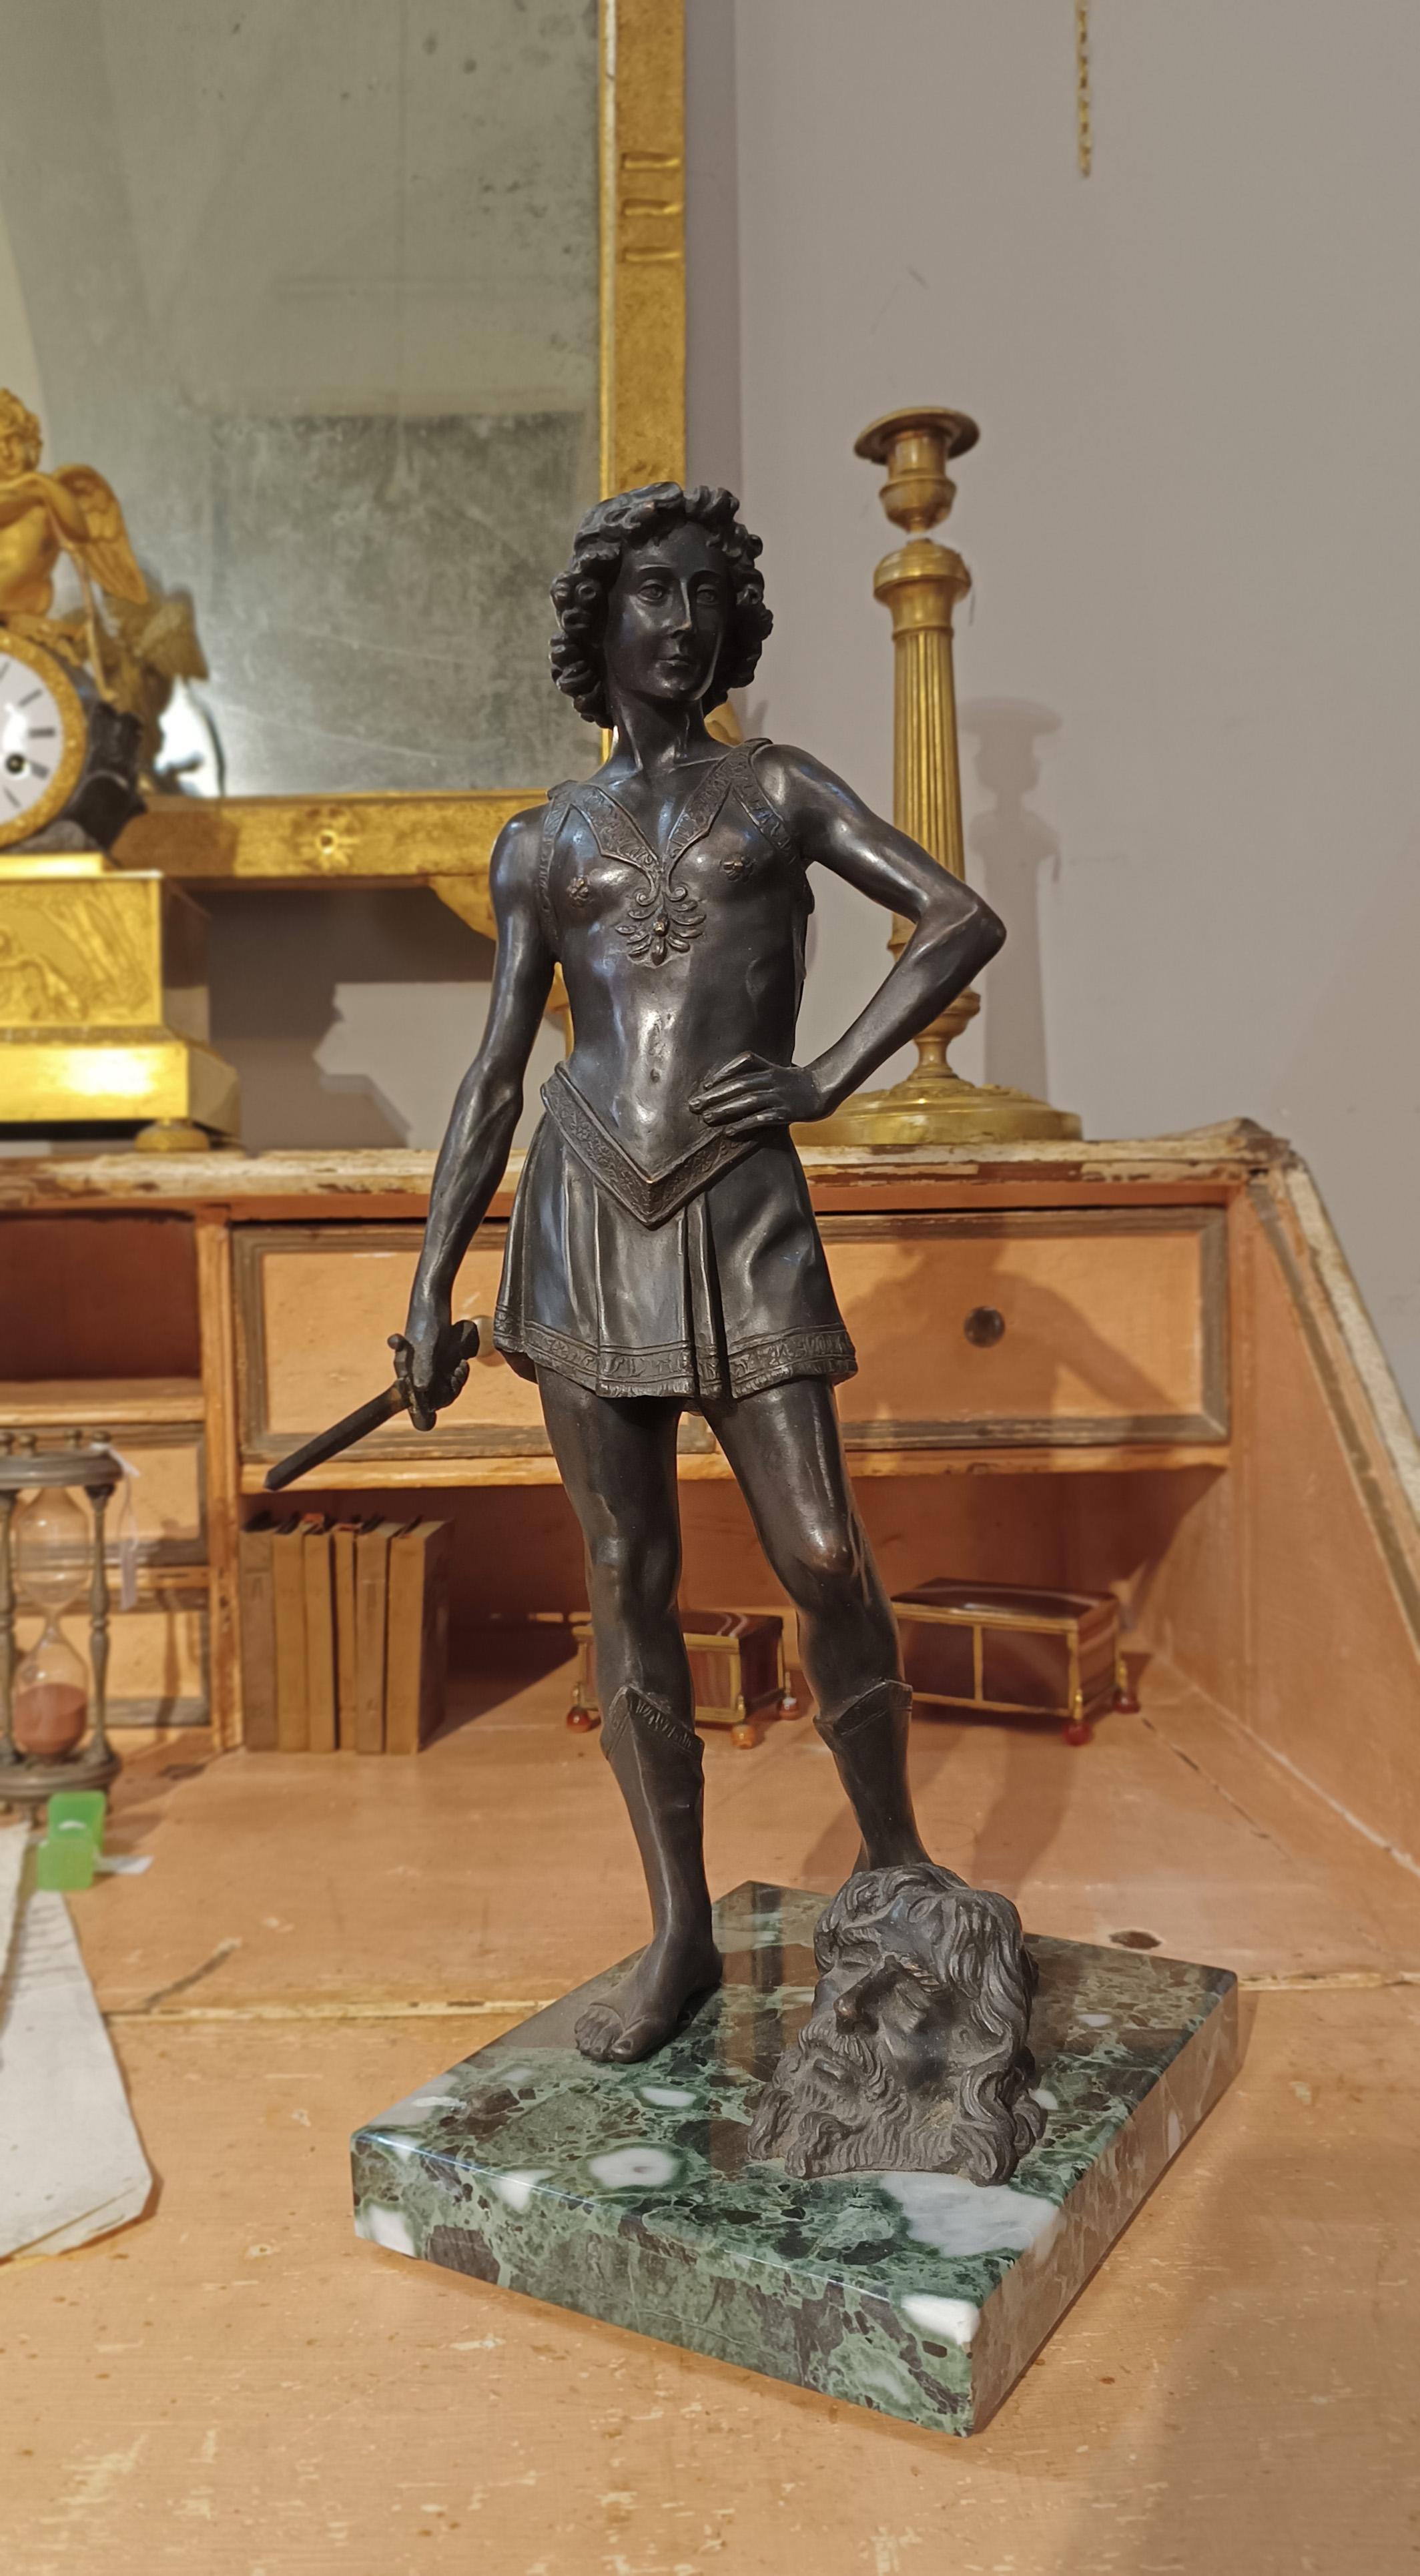 Beautiful bronze sculpture cast with the lost wax technique, depicting the young David standing with his sword raised, symbol of his victory over the giant Goliath, whose suffering head is represented on the green marble base. With a victorious